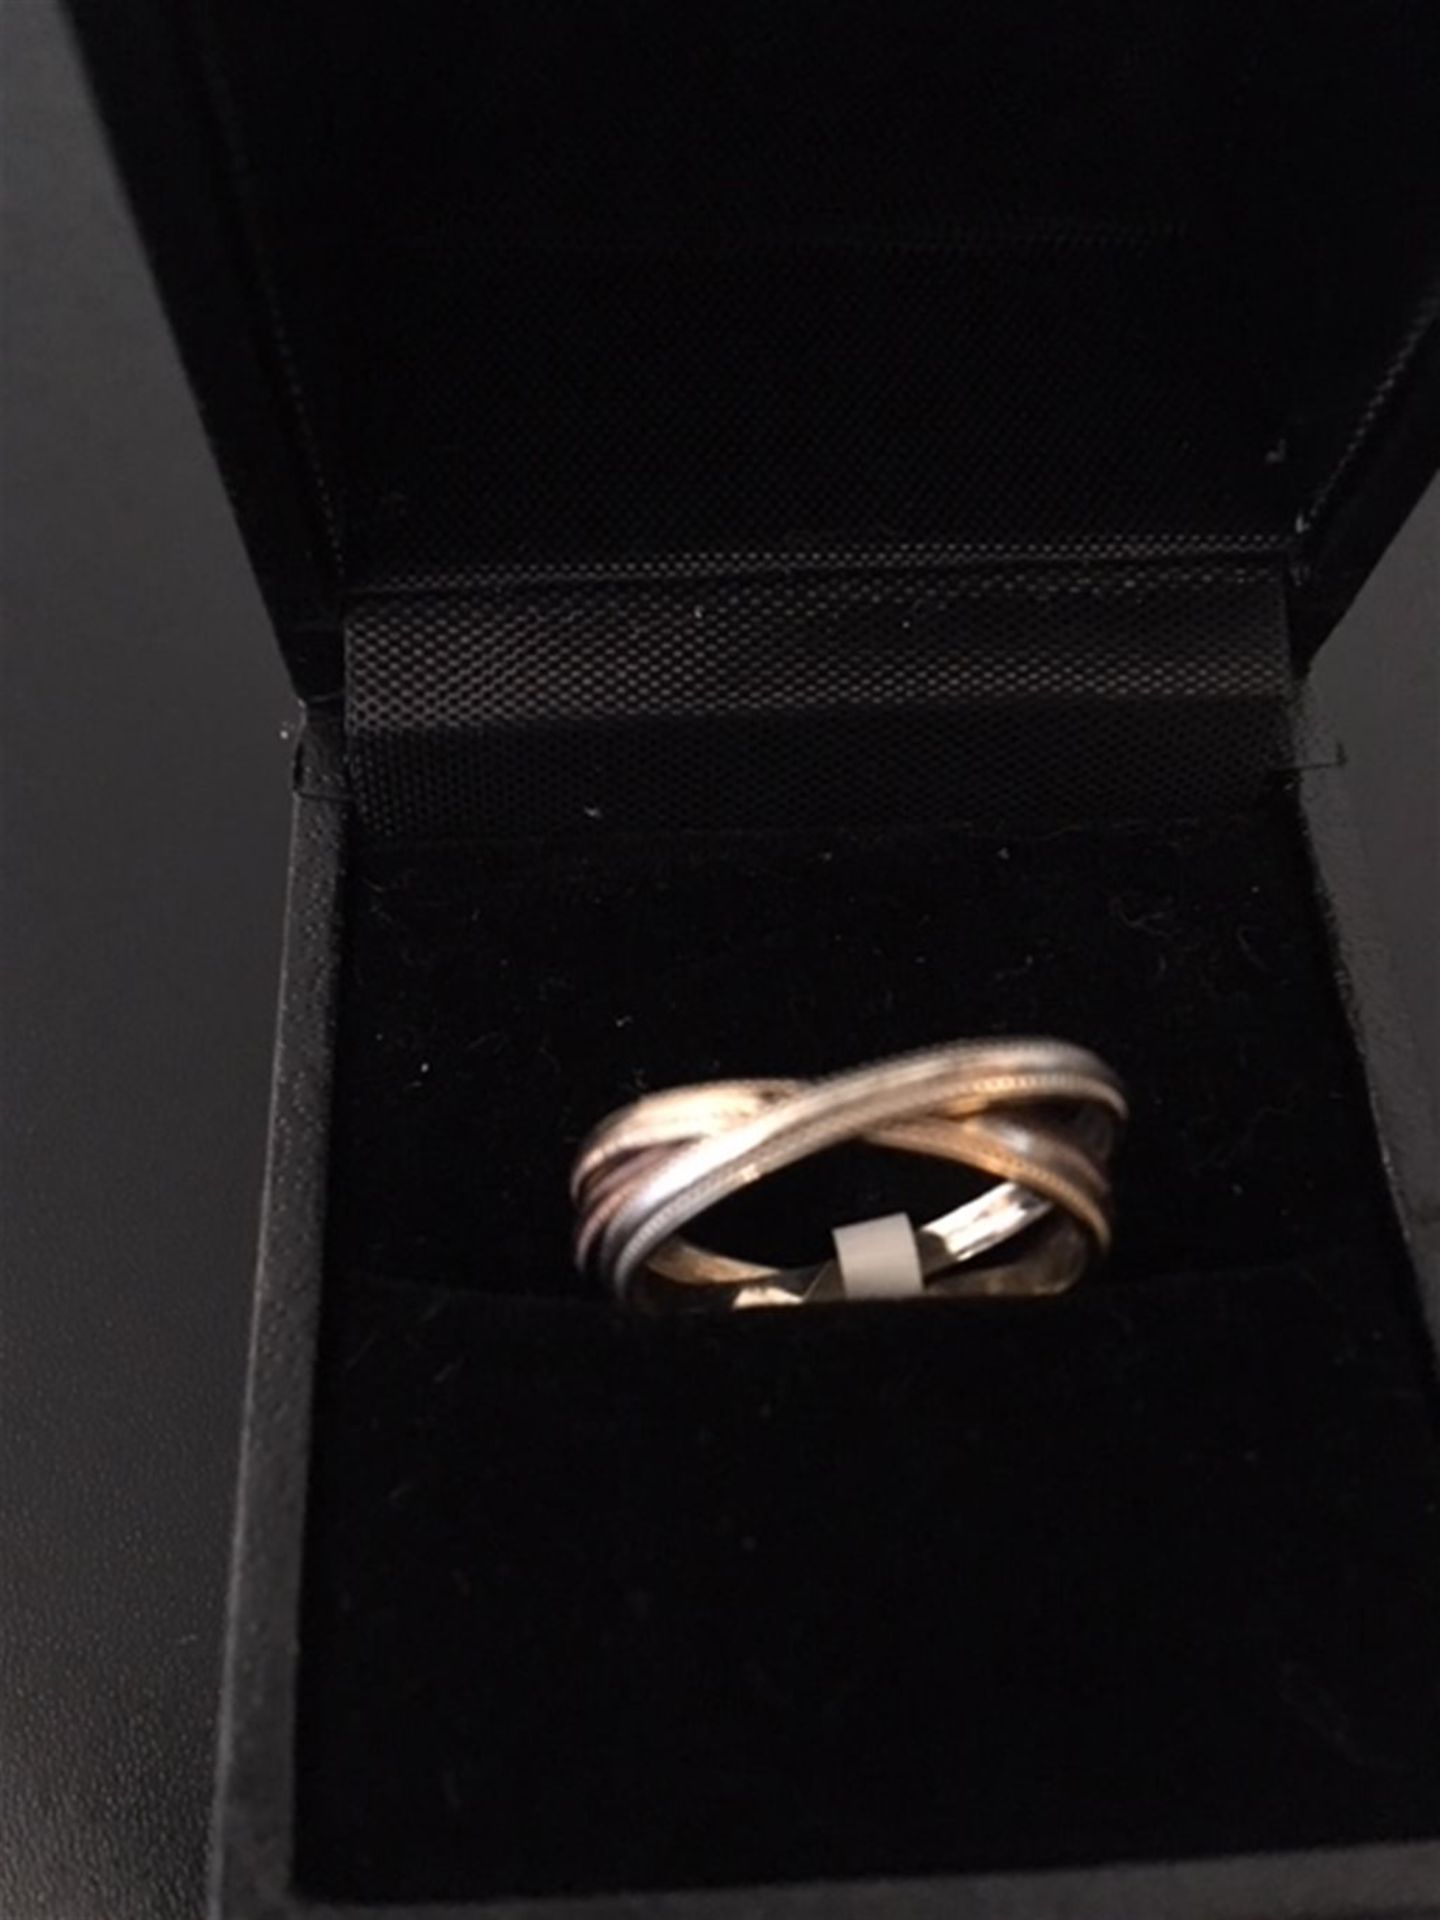 Tri colour Gold Russian wedding ring - Image 2 of 2